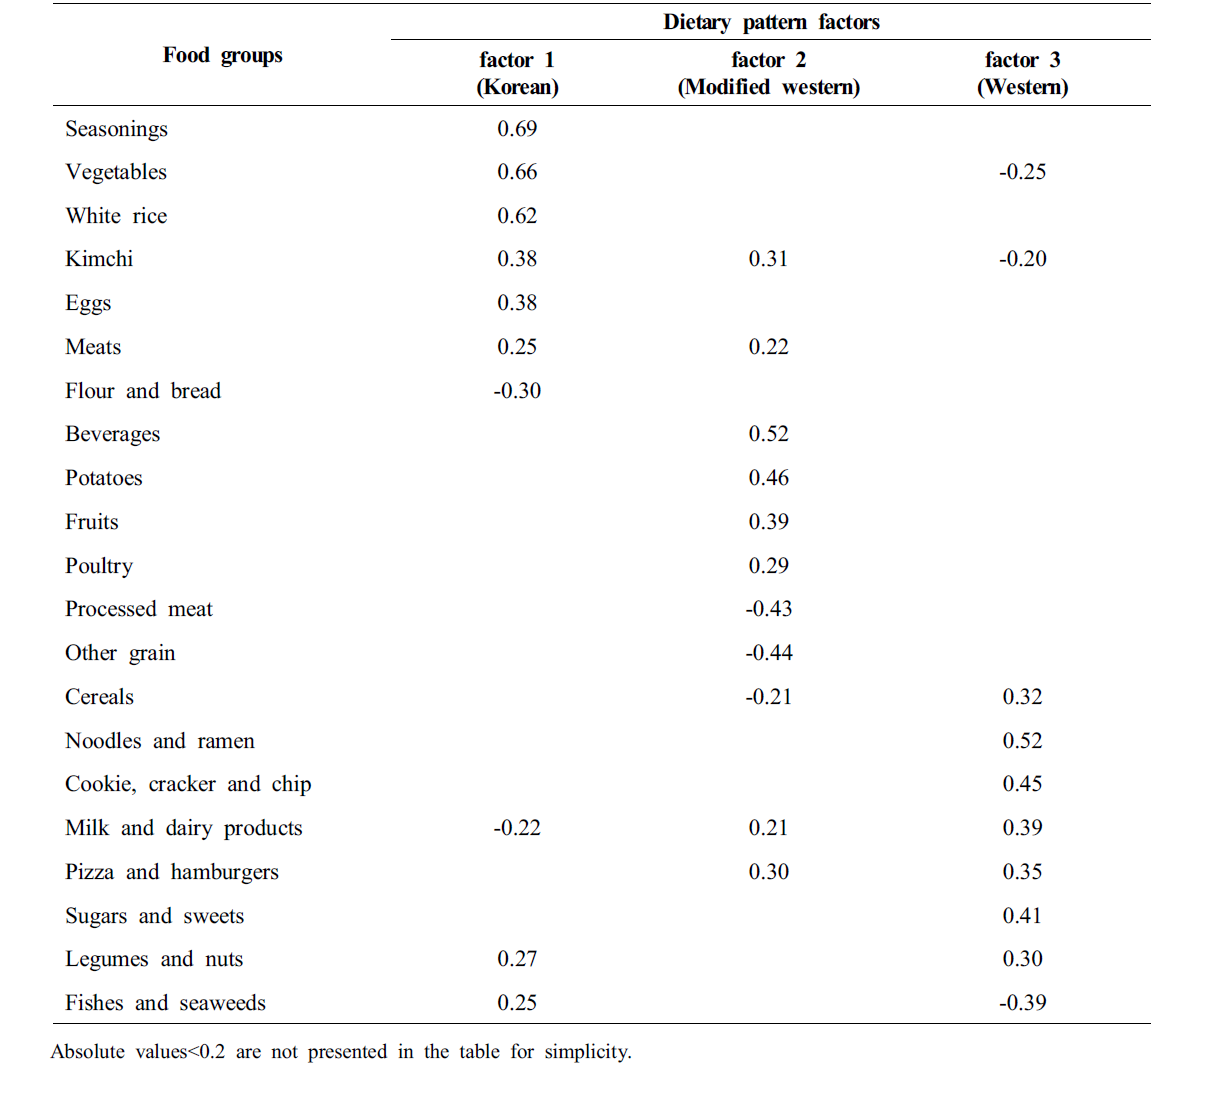 Factor loading matrix for the three major dietary patterns and their food groups